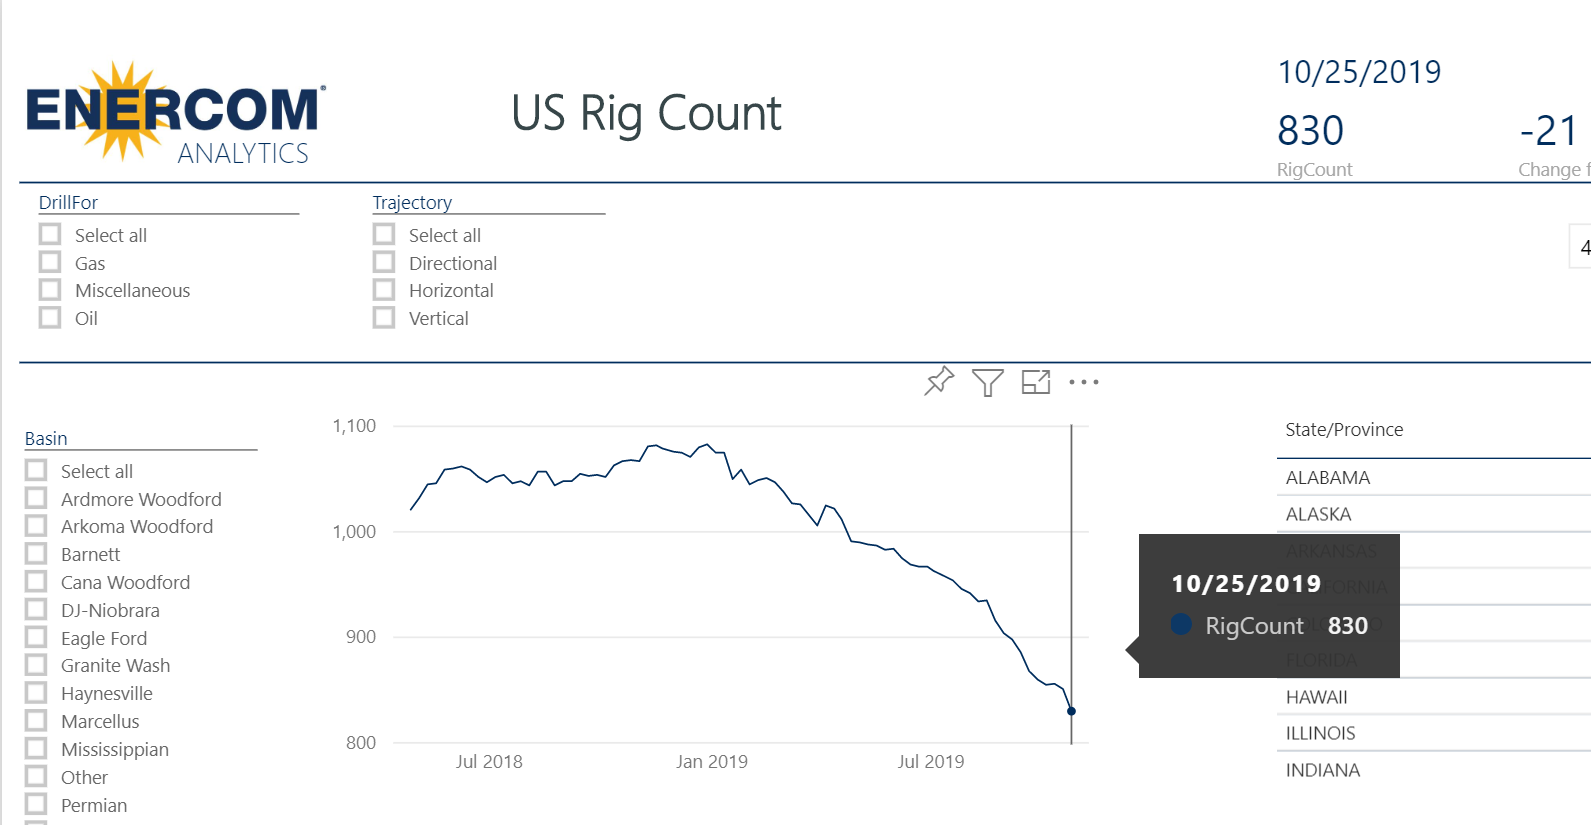 U.S. sheds 21 rigs; count down 830 rigs - oil and gas 360